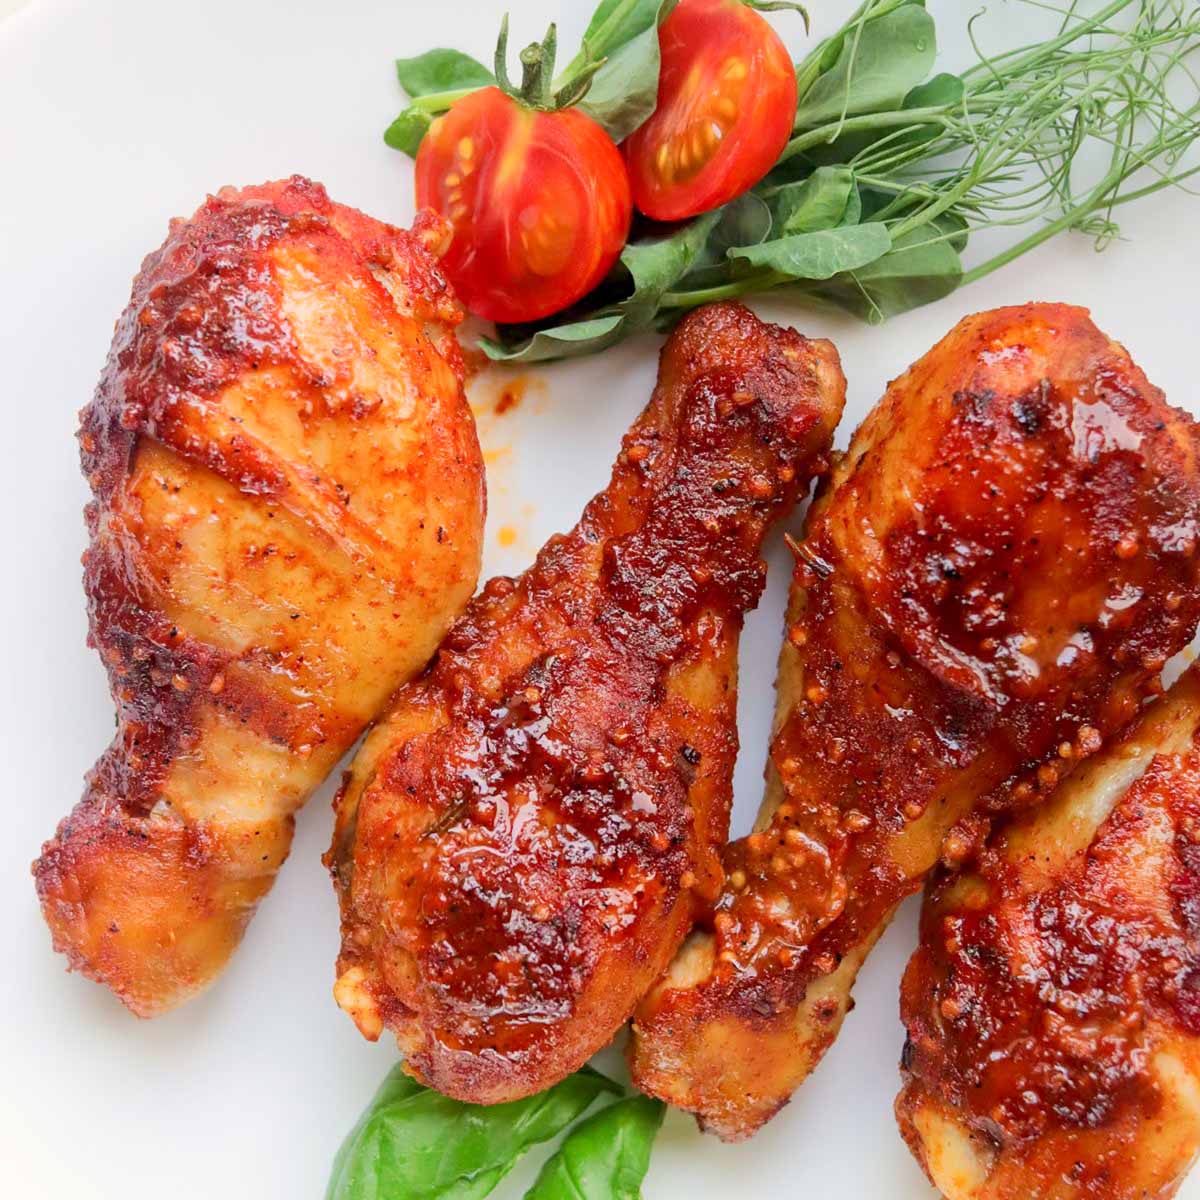 Thumbnail of slow cooker bbq chicken drumsticks.